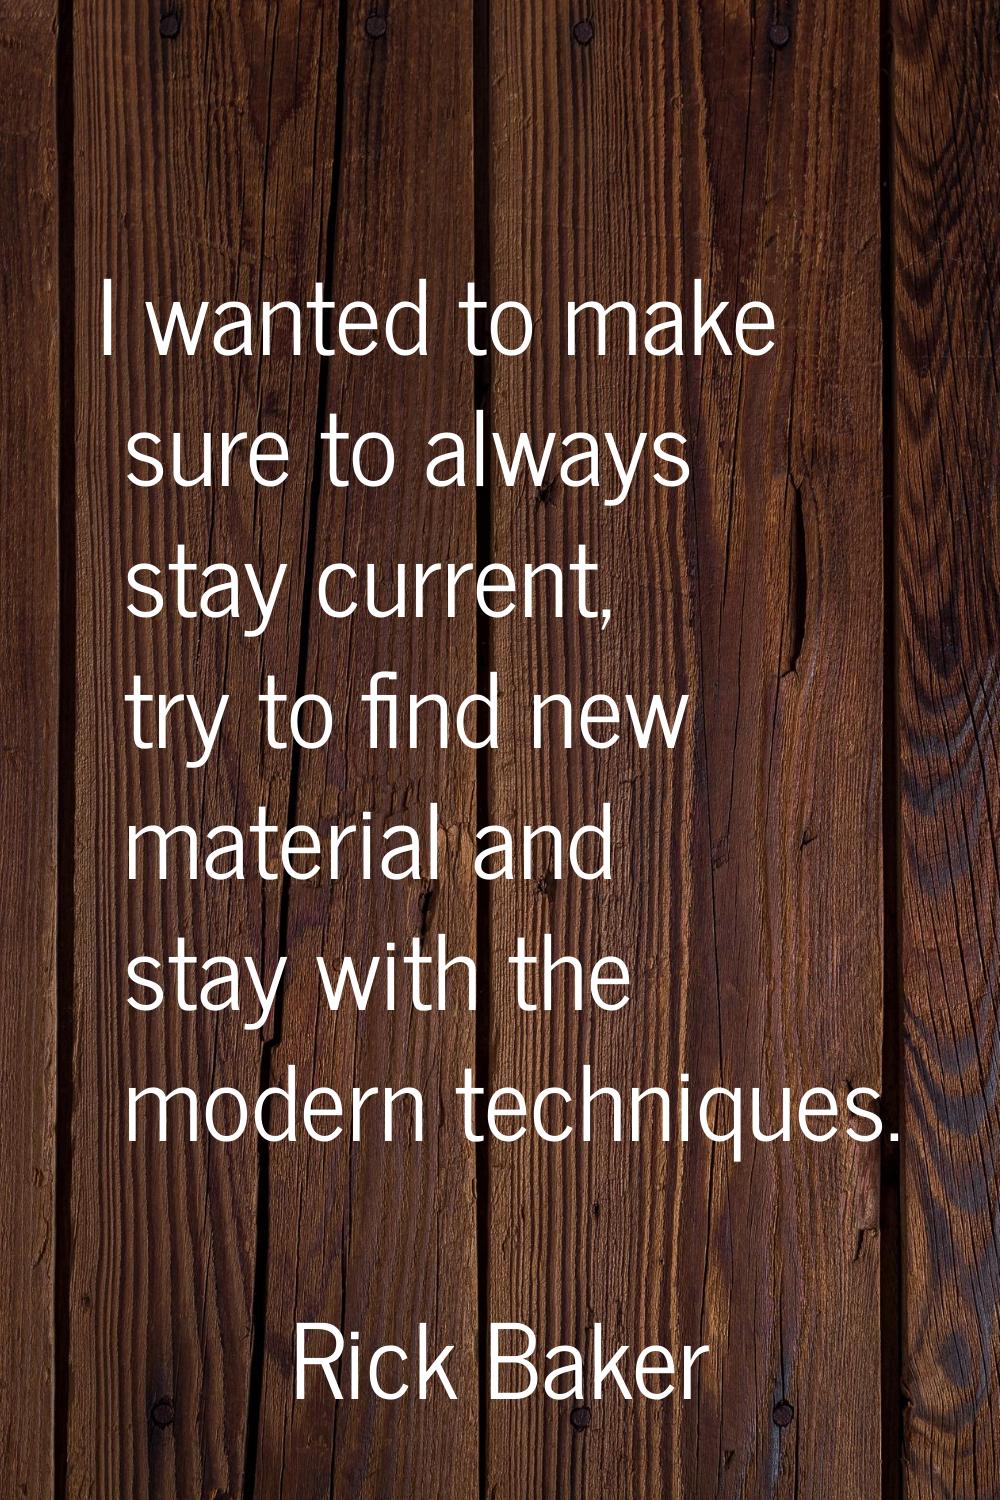 I wanted to make sure to always stay current, try to find new material and stay with the modern tec